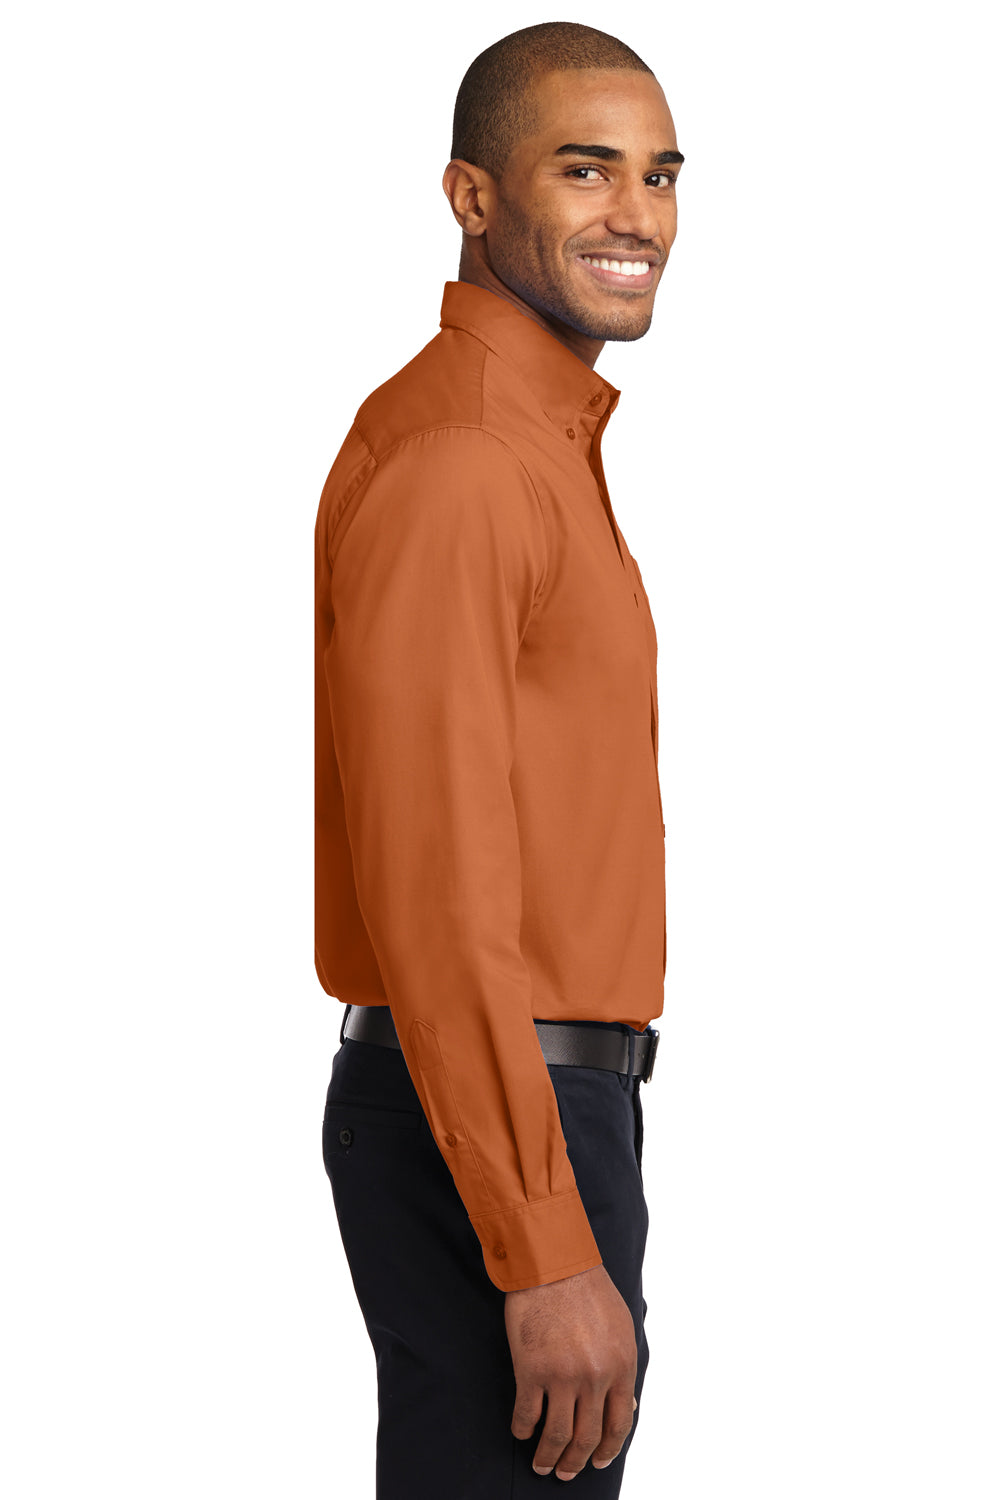 Port Authority S608/TLS608/S608ES Mens Easy Care Wrinkle Resistant Long Sleeve Button Down Shirt w/ Pocket Texas Orange Side